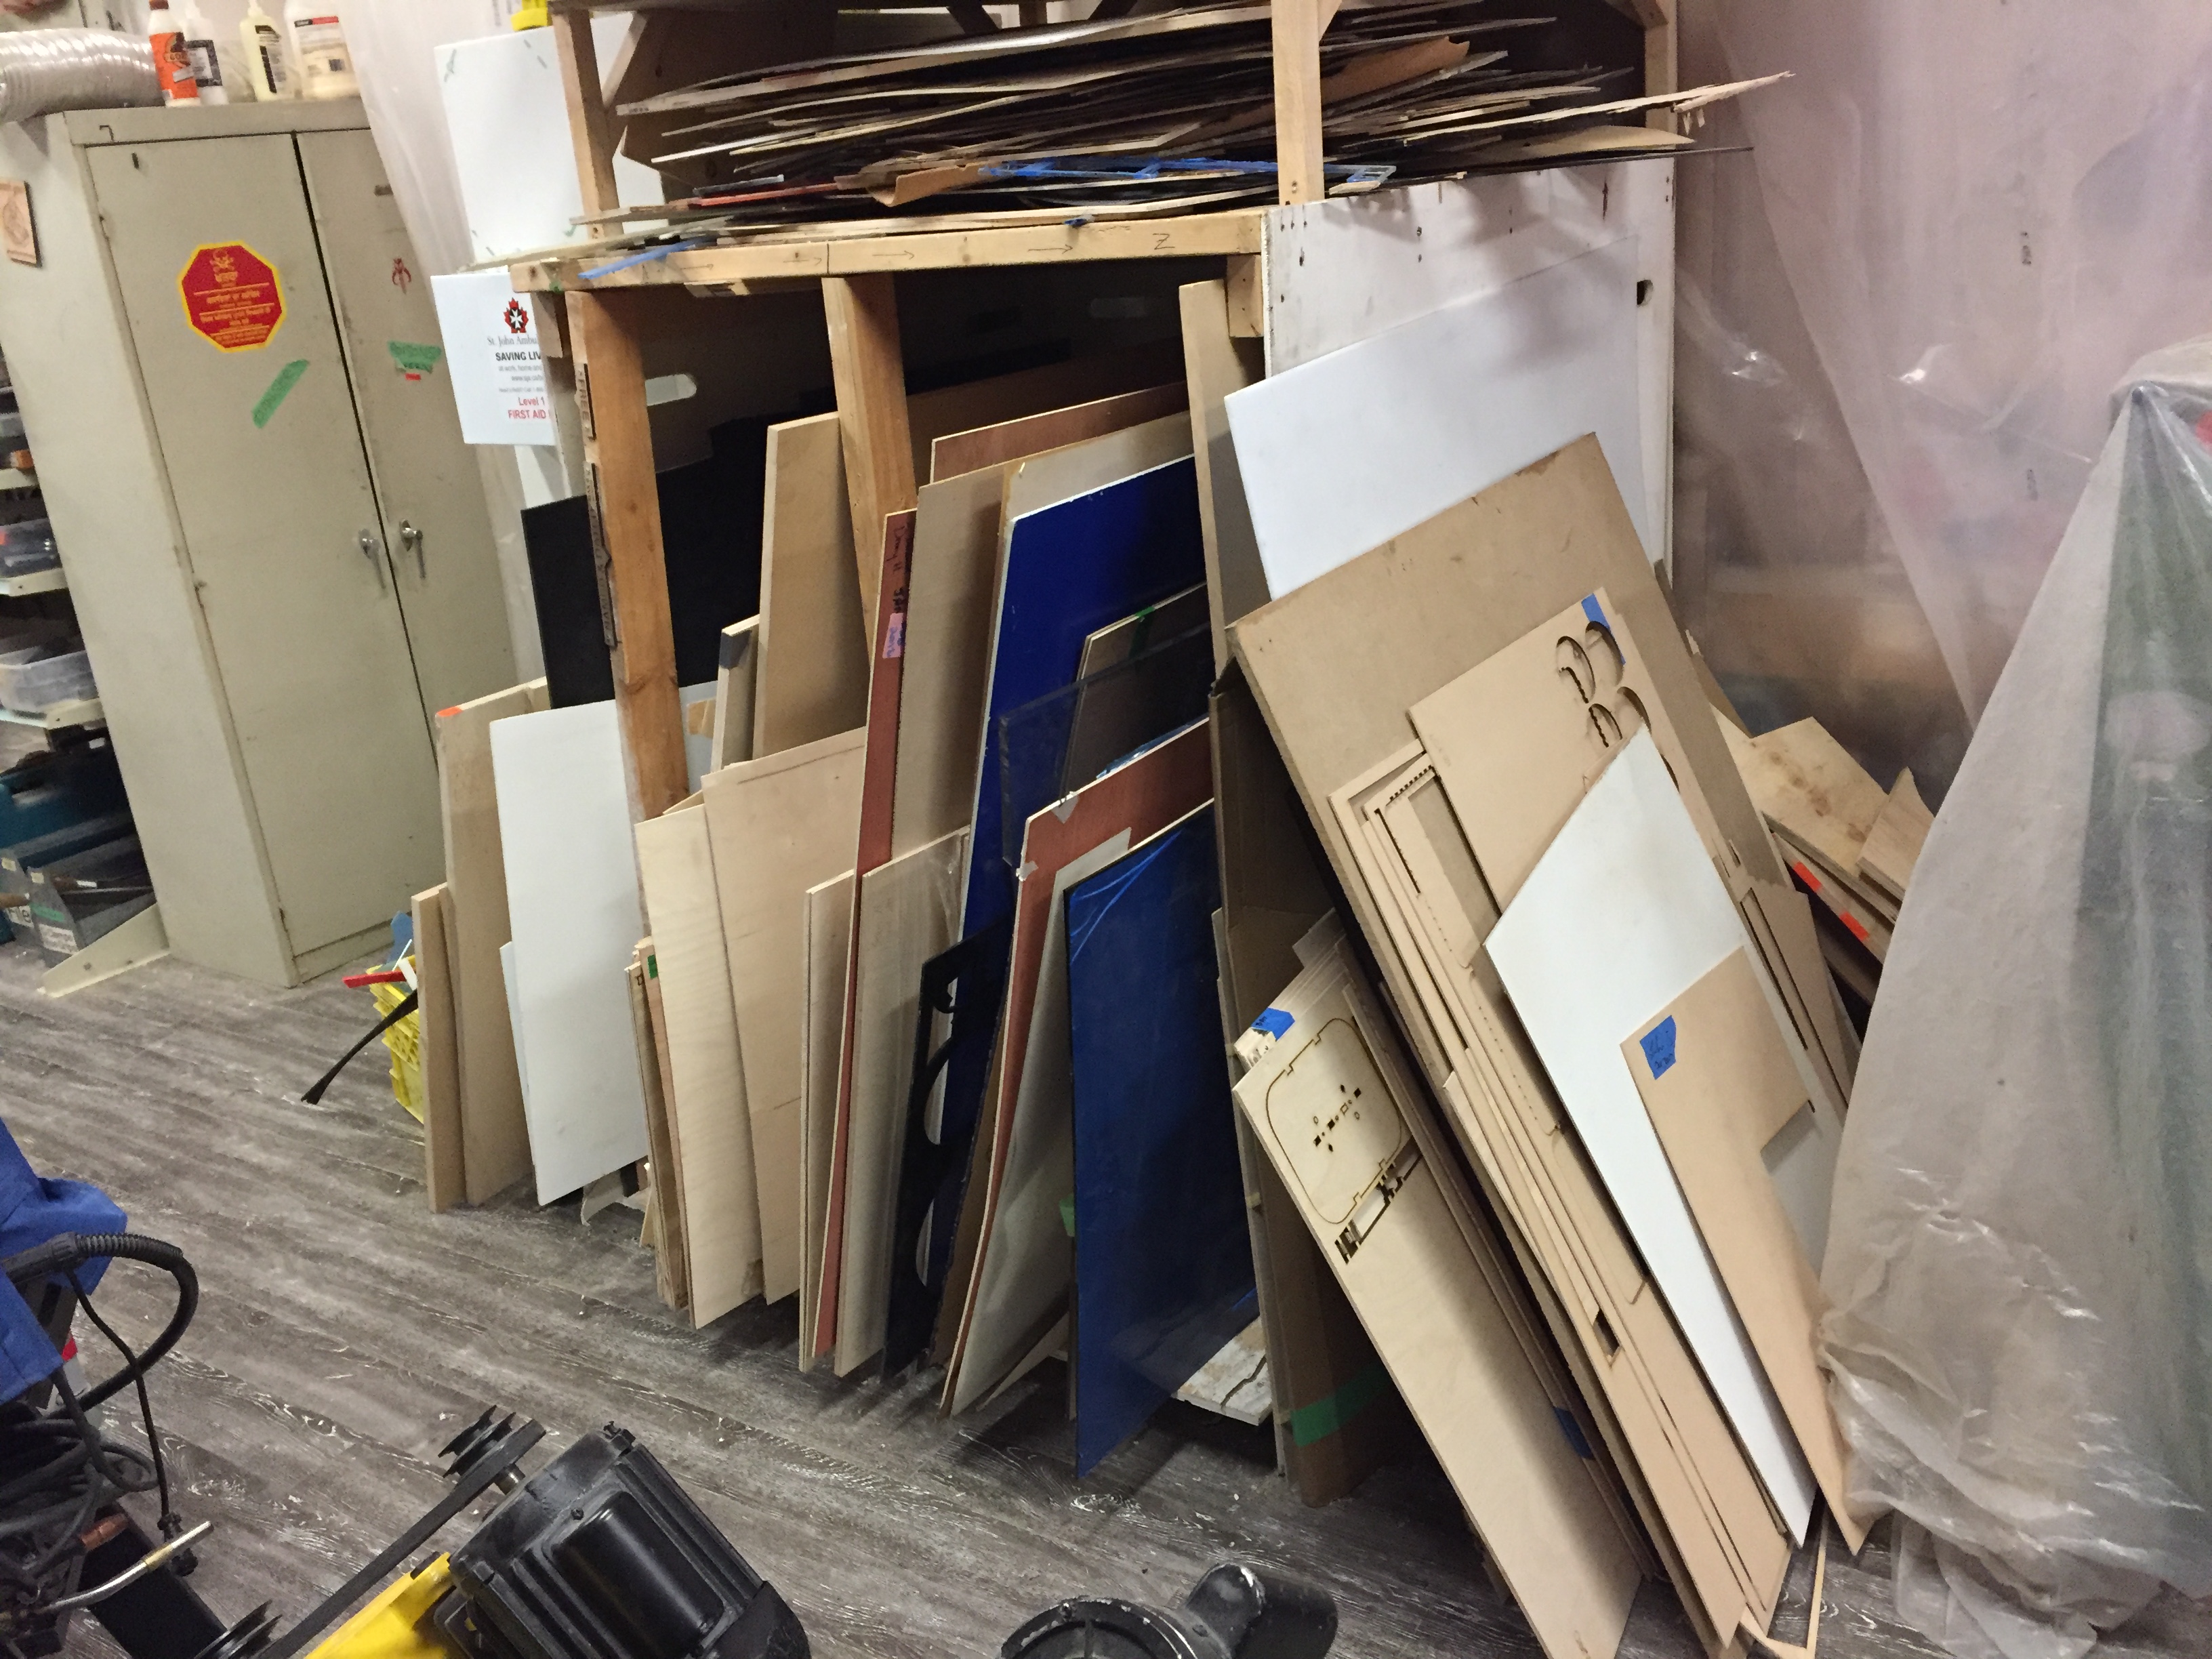 Excess Unclaimed Laser Cutter Materials - Space and infrastructure